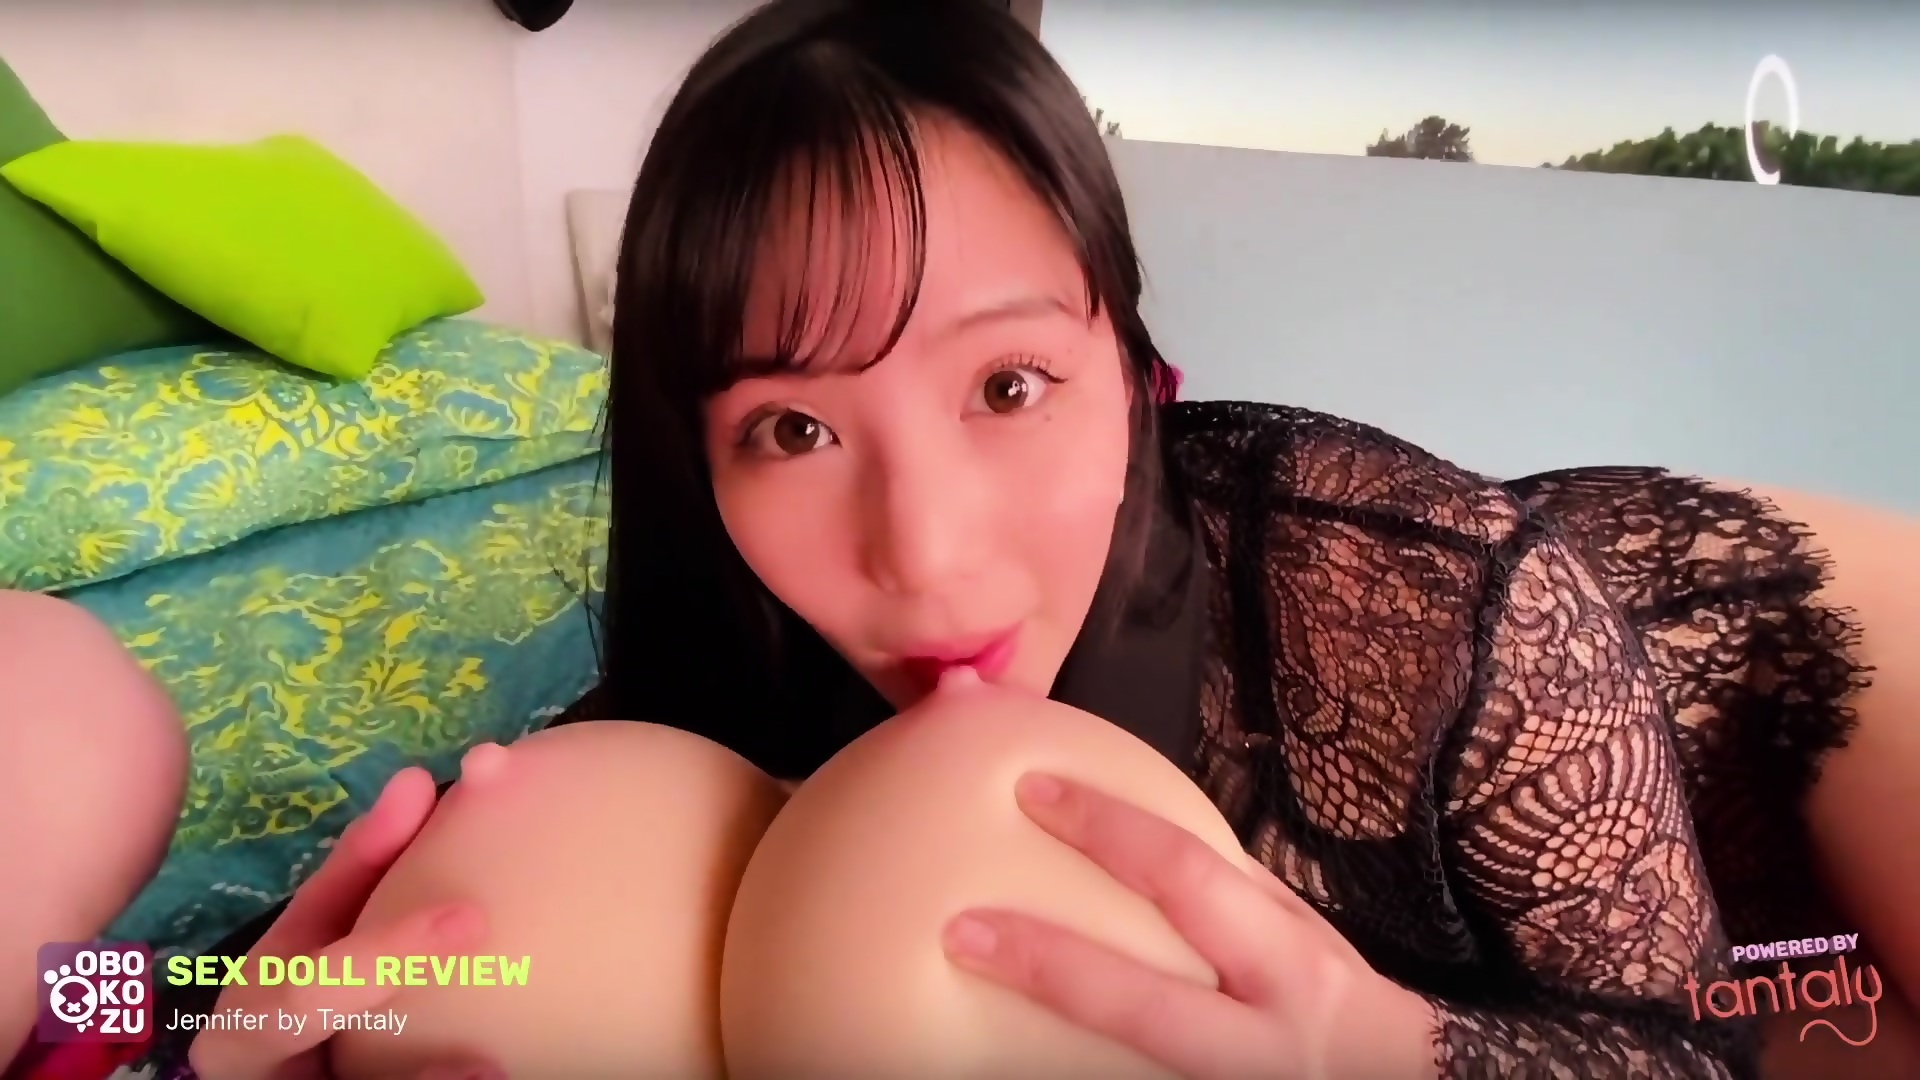 ObokzuXtantaly Sex Doll Review Threesome With Jennifer! - Lina Paige image